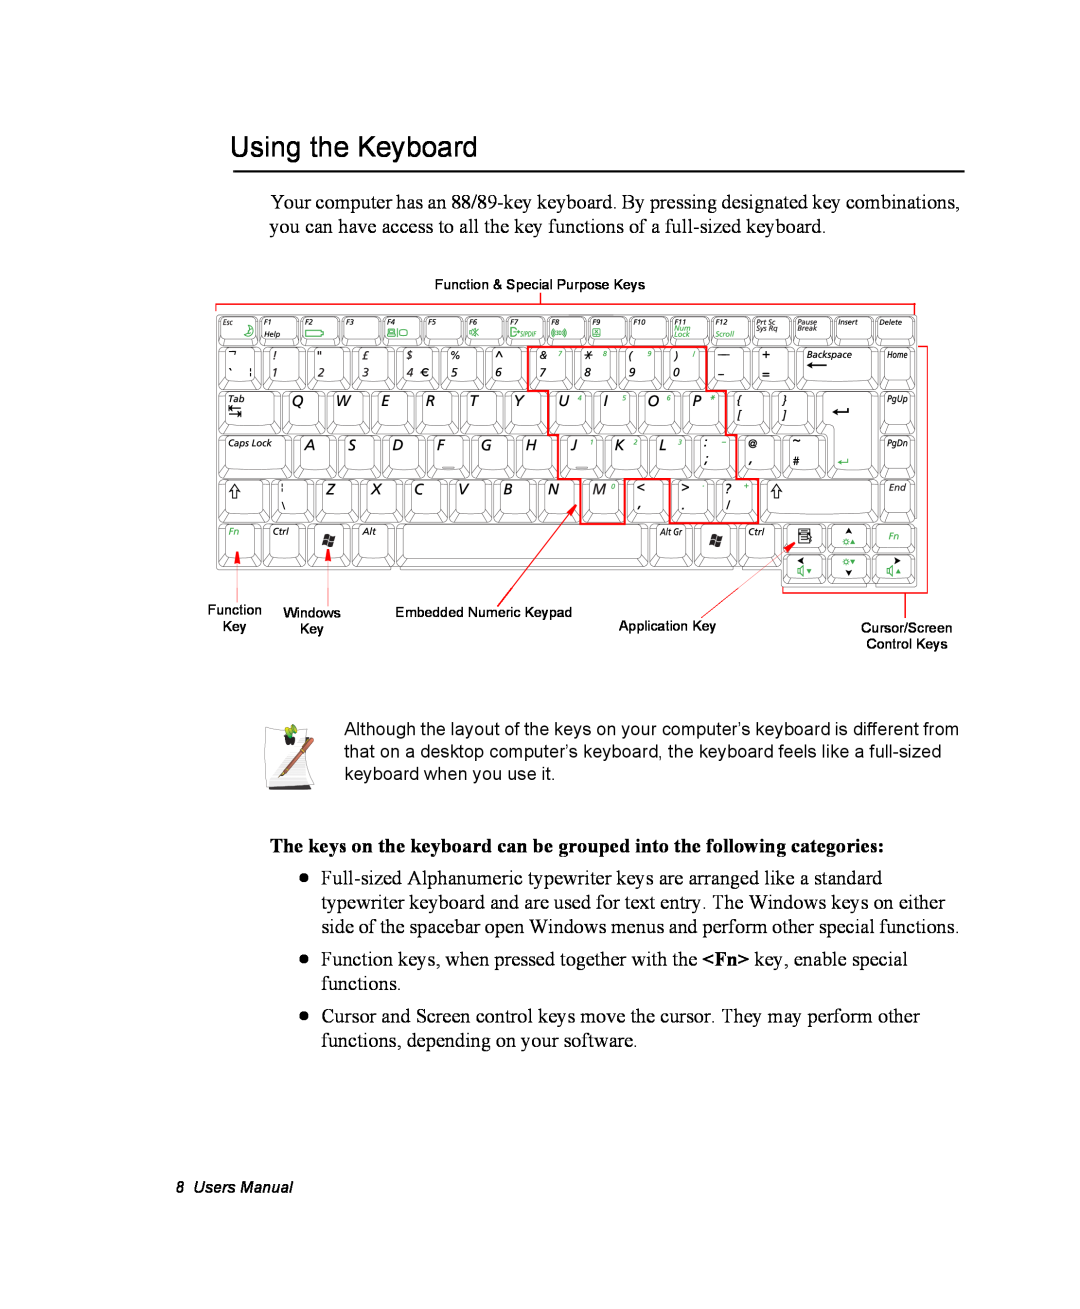 Samsung NM40PRCV02/SEF manual Using the Keyboard, The keys on the keyboard can be grouped into the following categories 